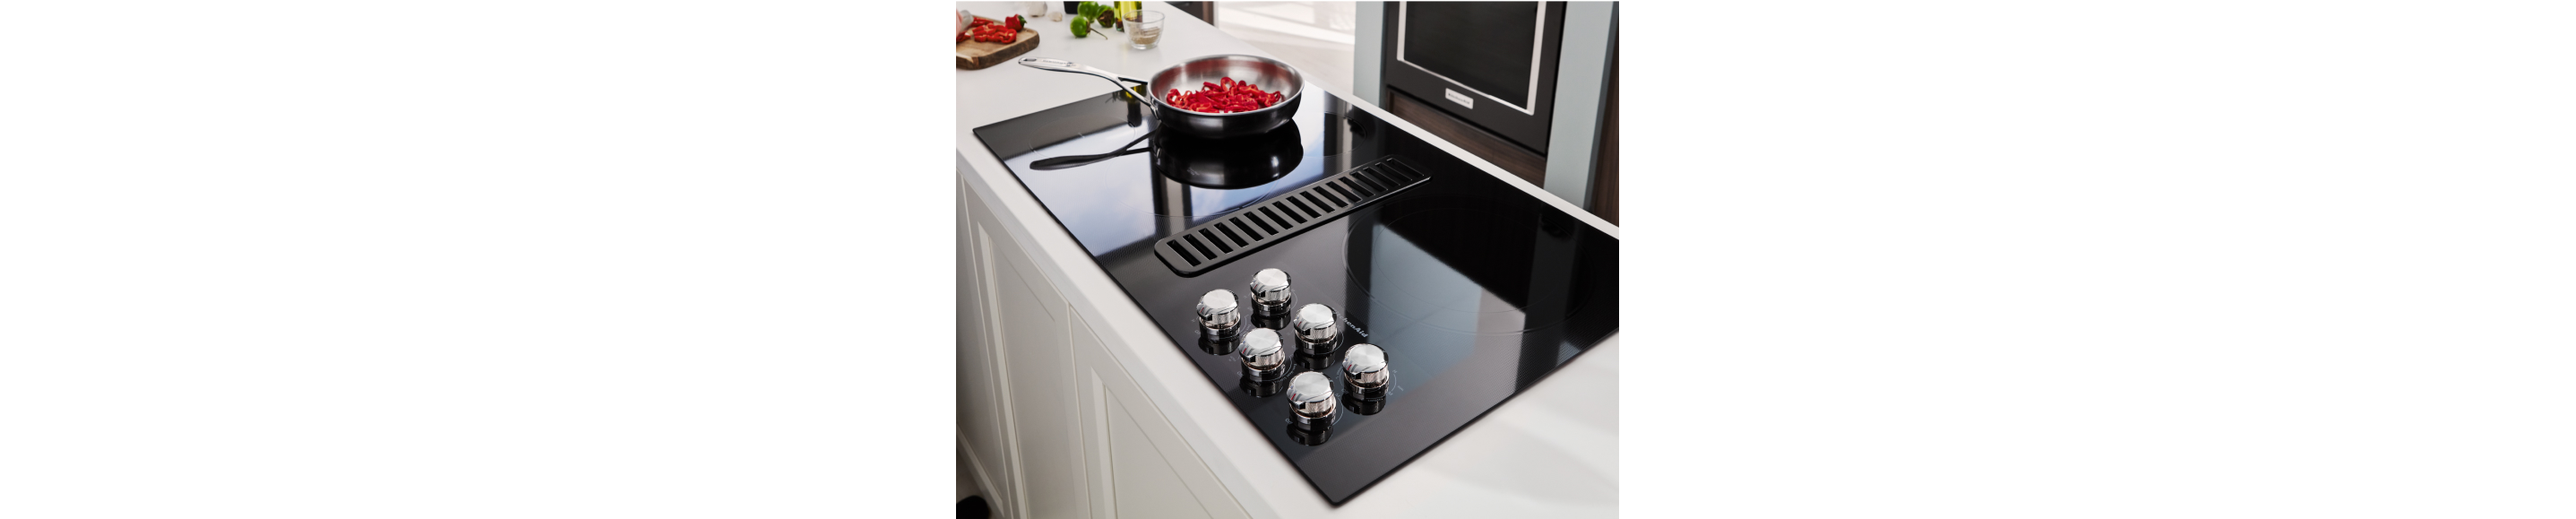 Cooktops for Every Home